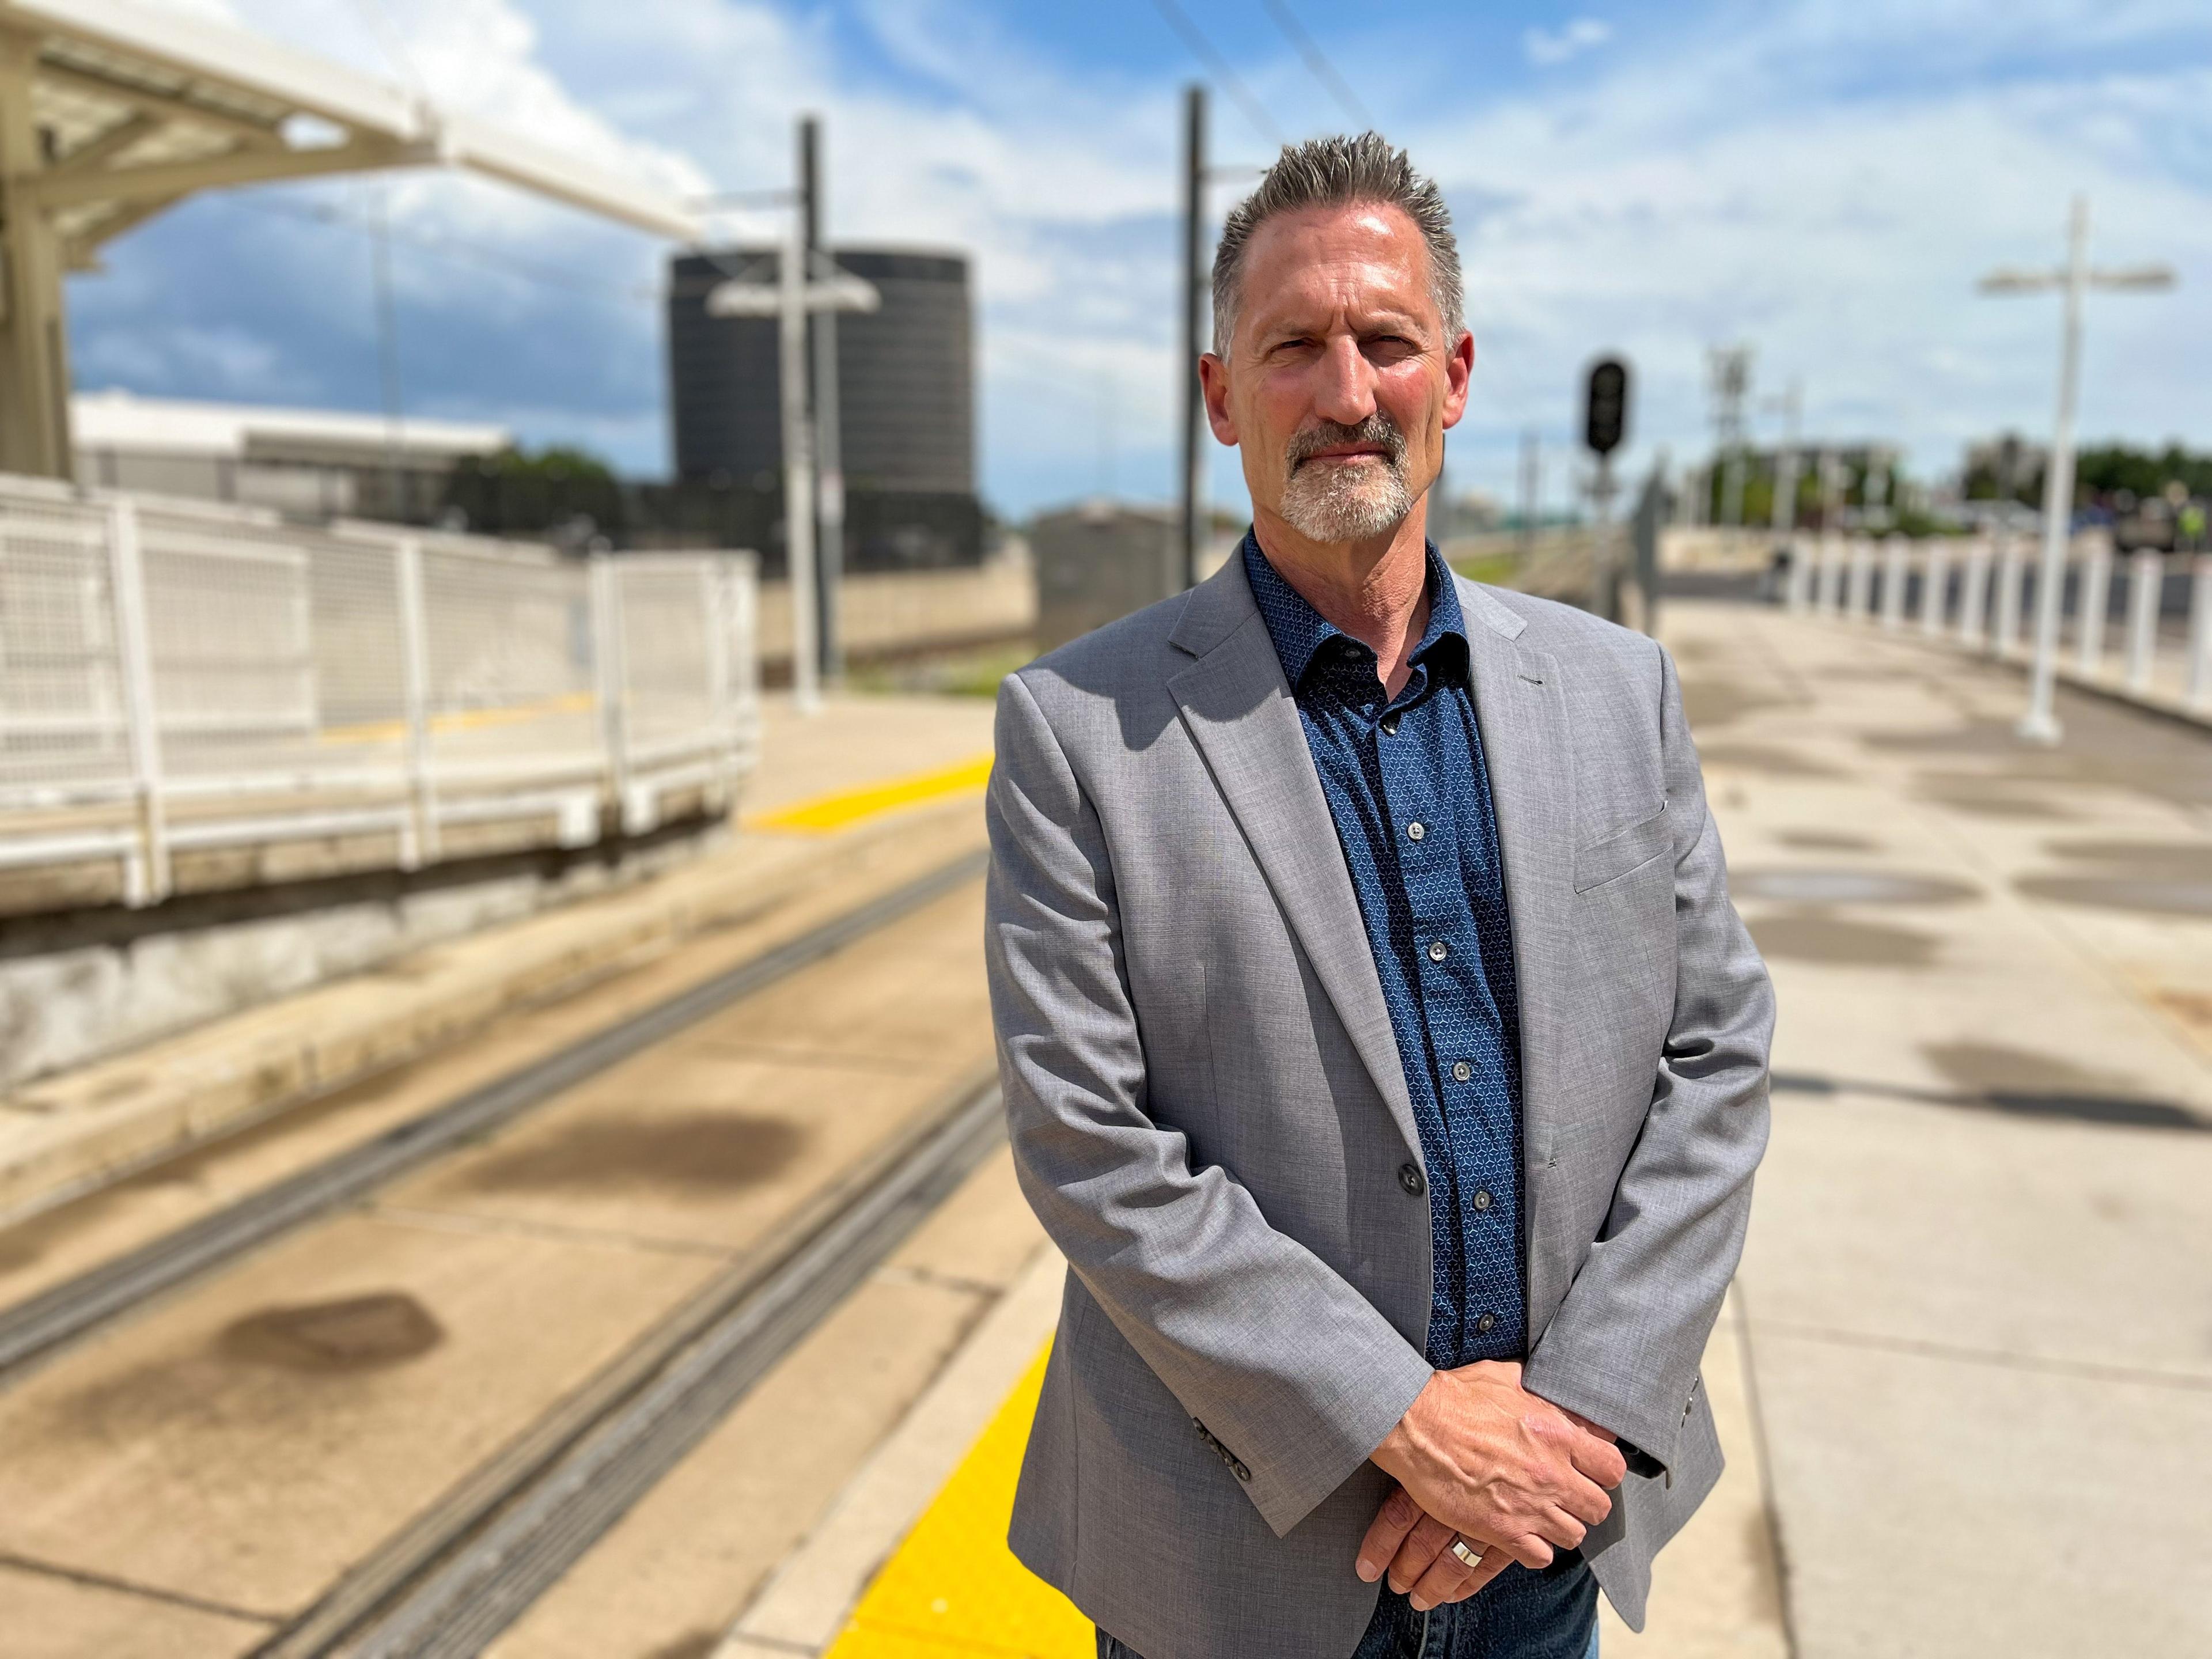 A transit official standing for a portrait at a light rail station in Denver